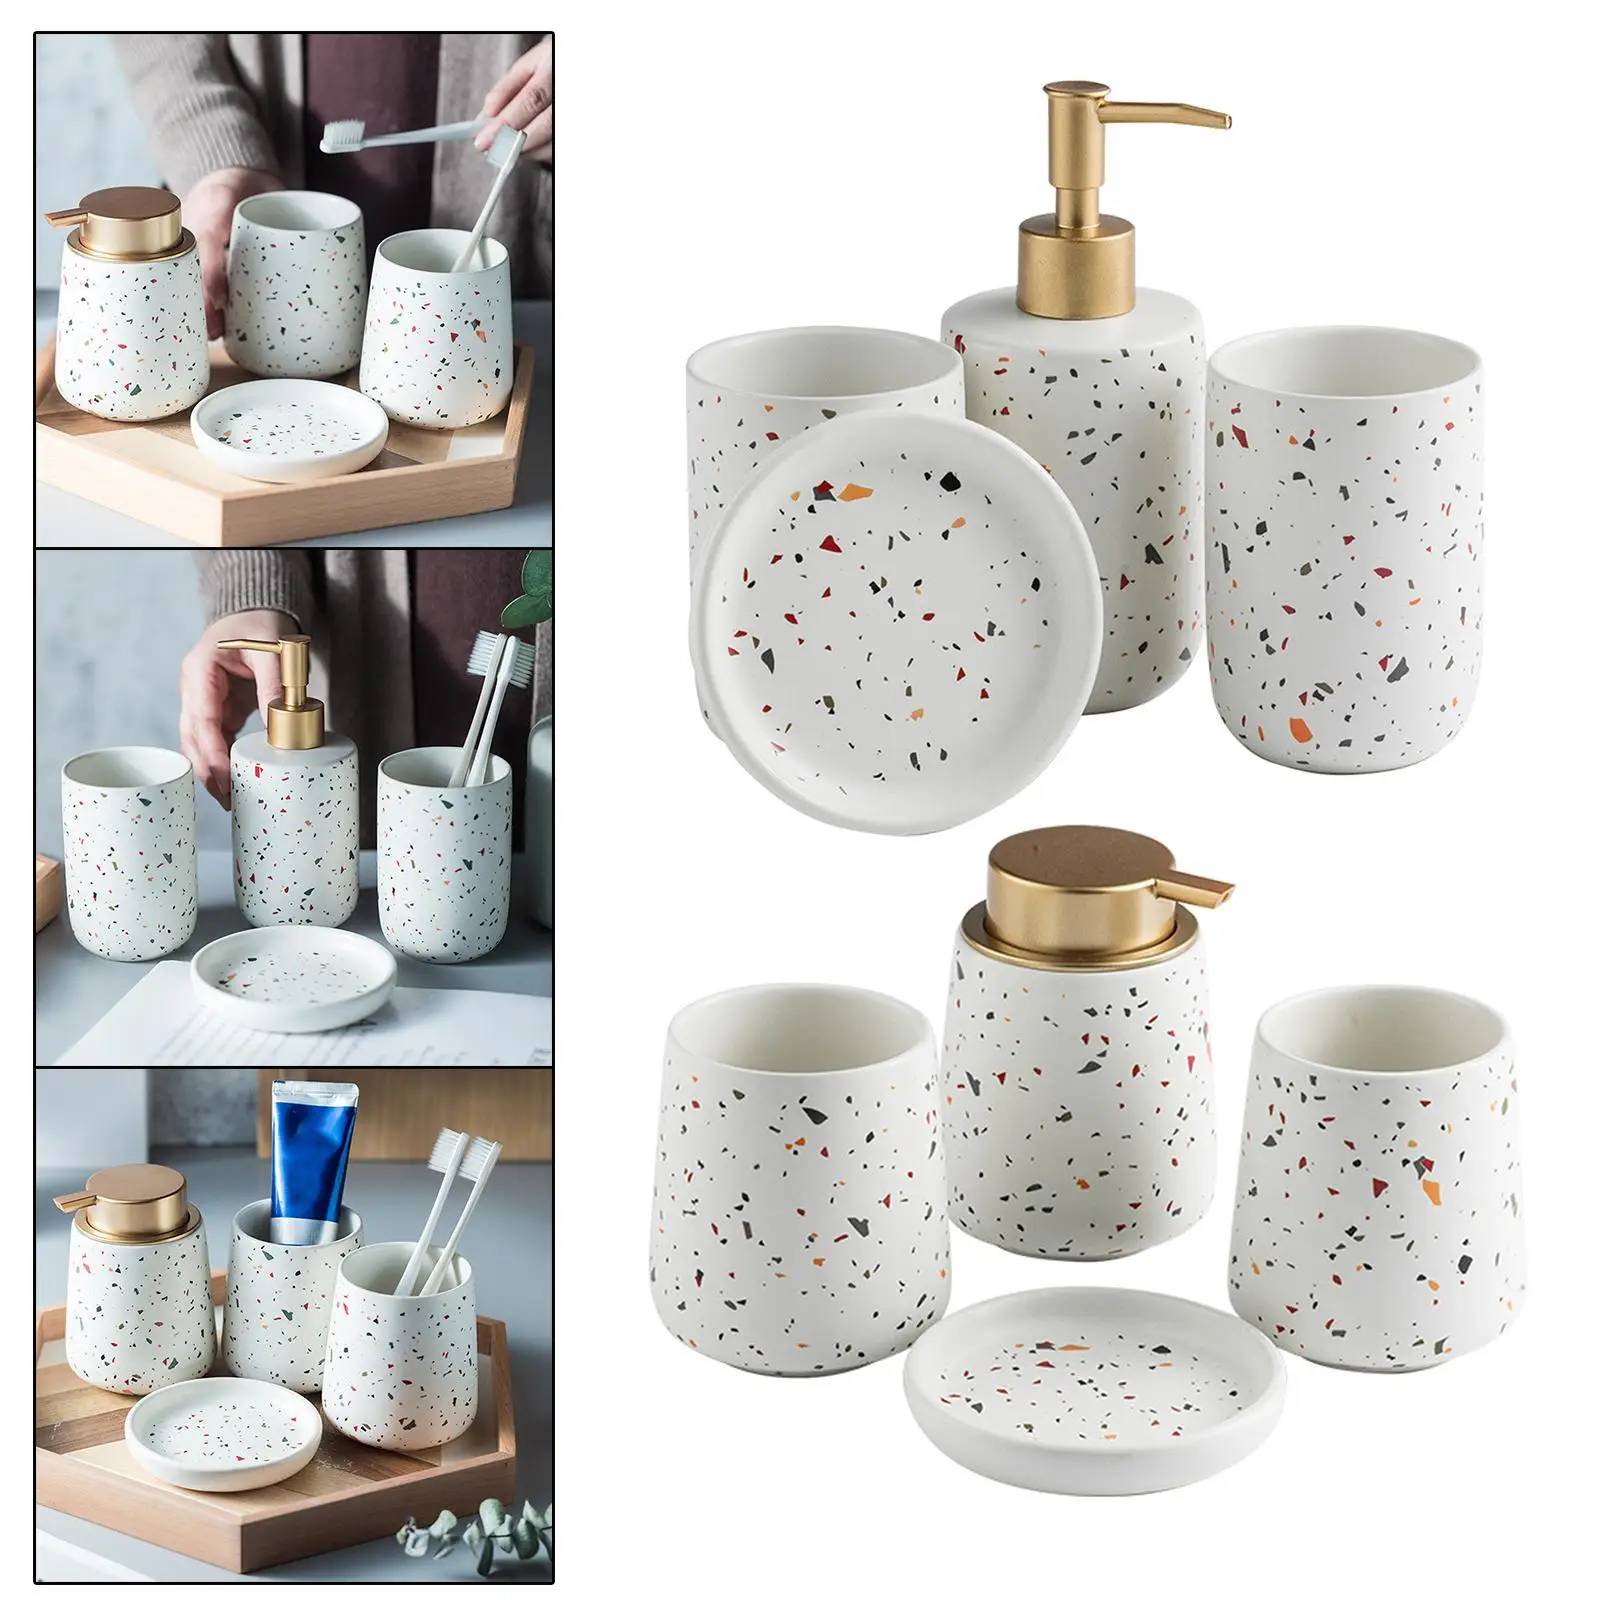 Bathroom Accessories Set Soap Dish Toothbrush Cup Mouth Cup Countertop Decor